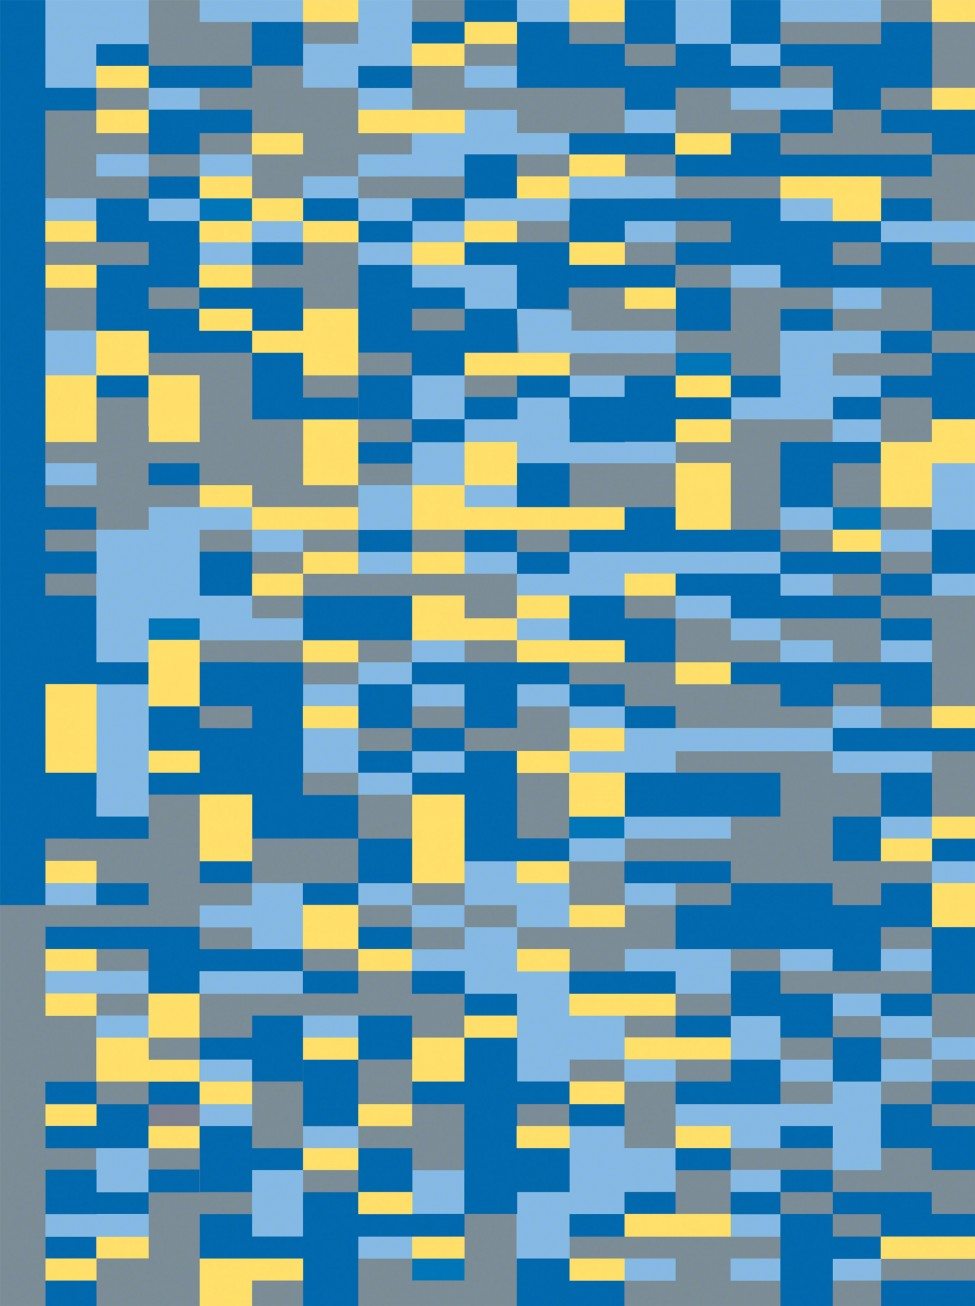 An artwork by Sunnye Collins representing a snapshot of a partial DNA sequence of a white shark. A science educator by training, Collins’s artwork comes from a desire to encour­age people to think about science in a different way. Four colours are chosen, one for each nucleobase that ultimately makes up nucleotides. She is fascinated by this micro-shuffling DNA, which ultimately creates every living thing on the planet. The resource for this code comes from the GenBank at the National Center for Biotechnology Information.<br />
www.sunnyecollins.com